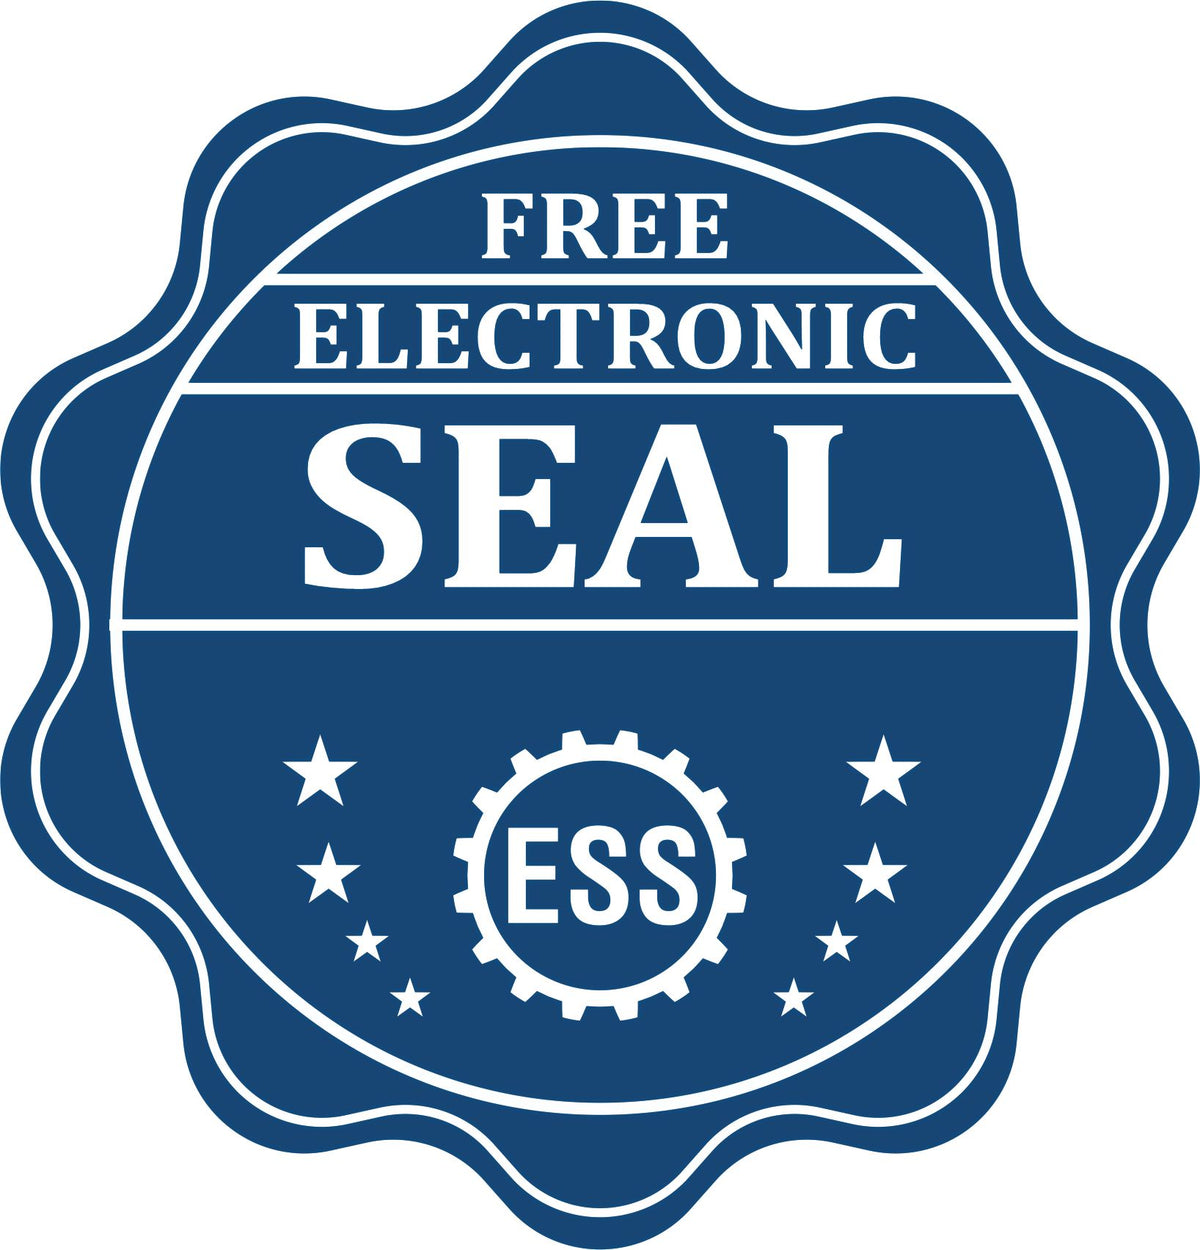 A badge showing a free electronic seal for the Handheld North Carolina Professional Engineer Embosser with stars and the ESS gear on the emblem.